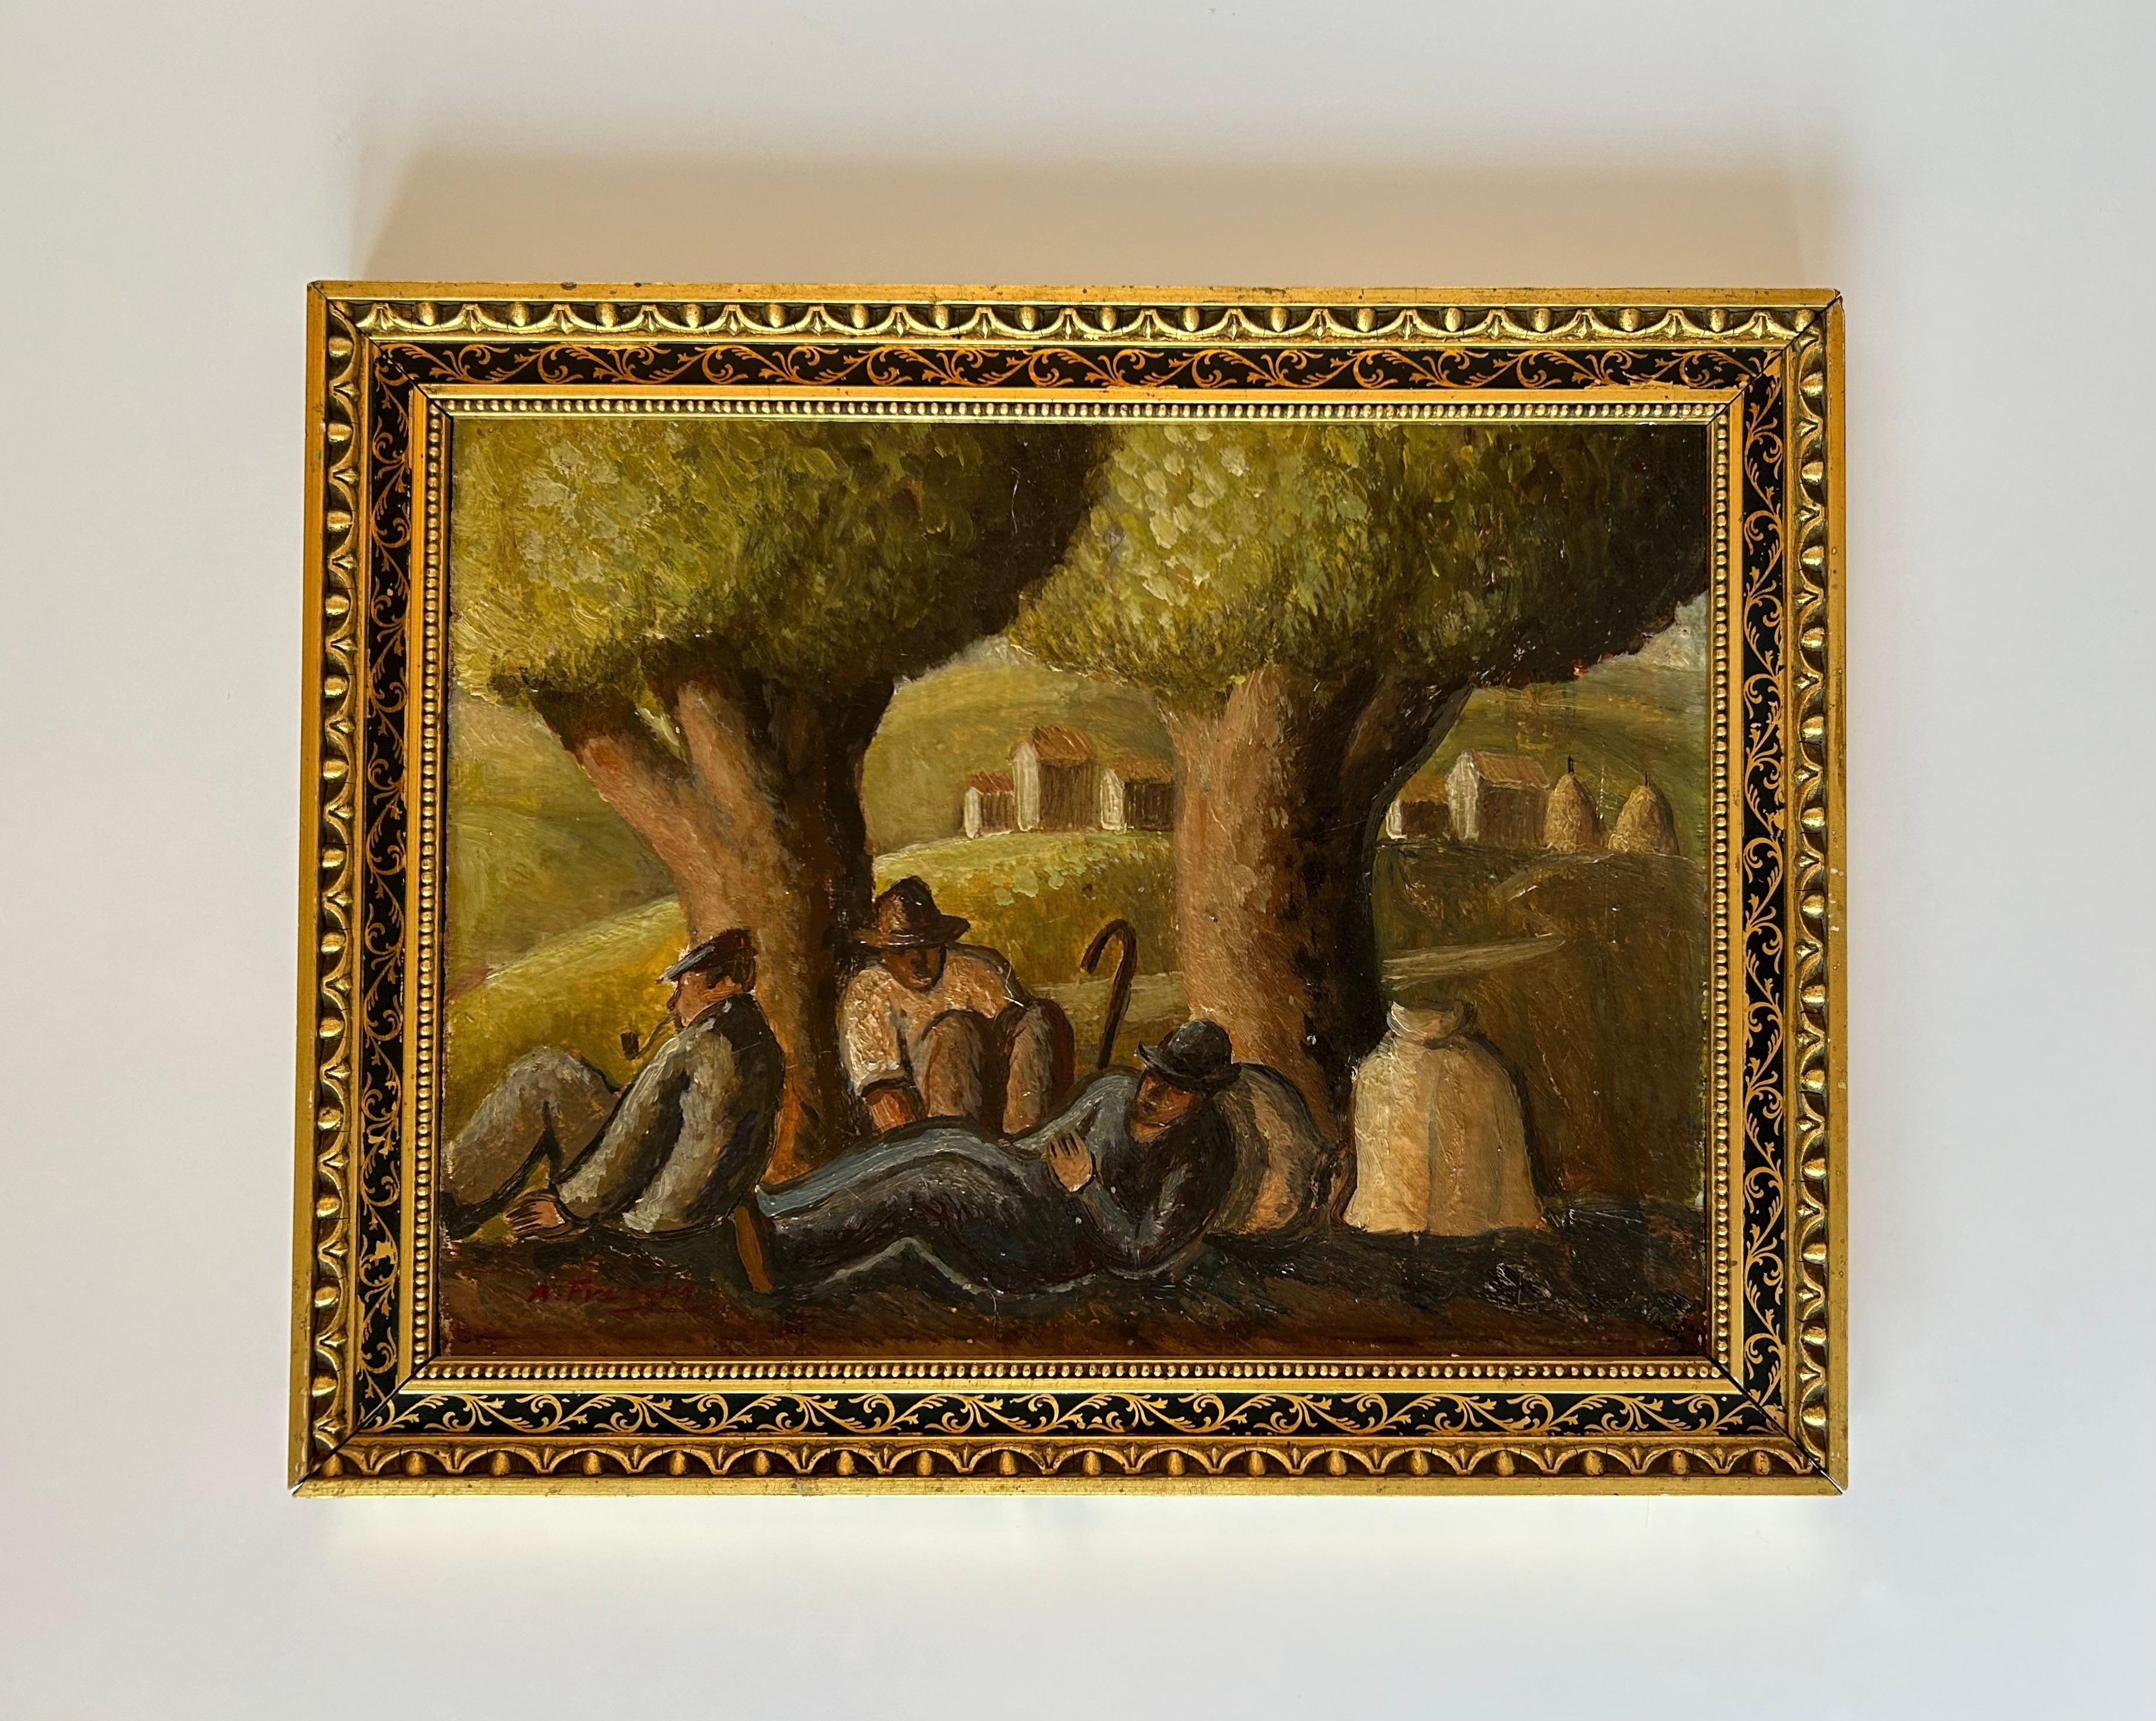 A wonderful Italian painting depicting peasants at rest under trees, with haystacks and farm buildings in the distance. Oil on board, late nineteenth century or early twentieth century, in a beautifully gilded Italian frame. 
An incredibly